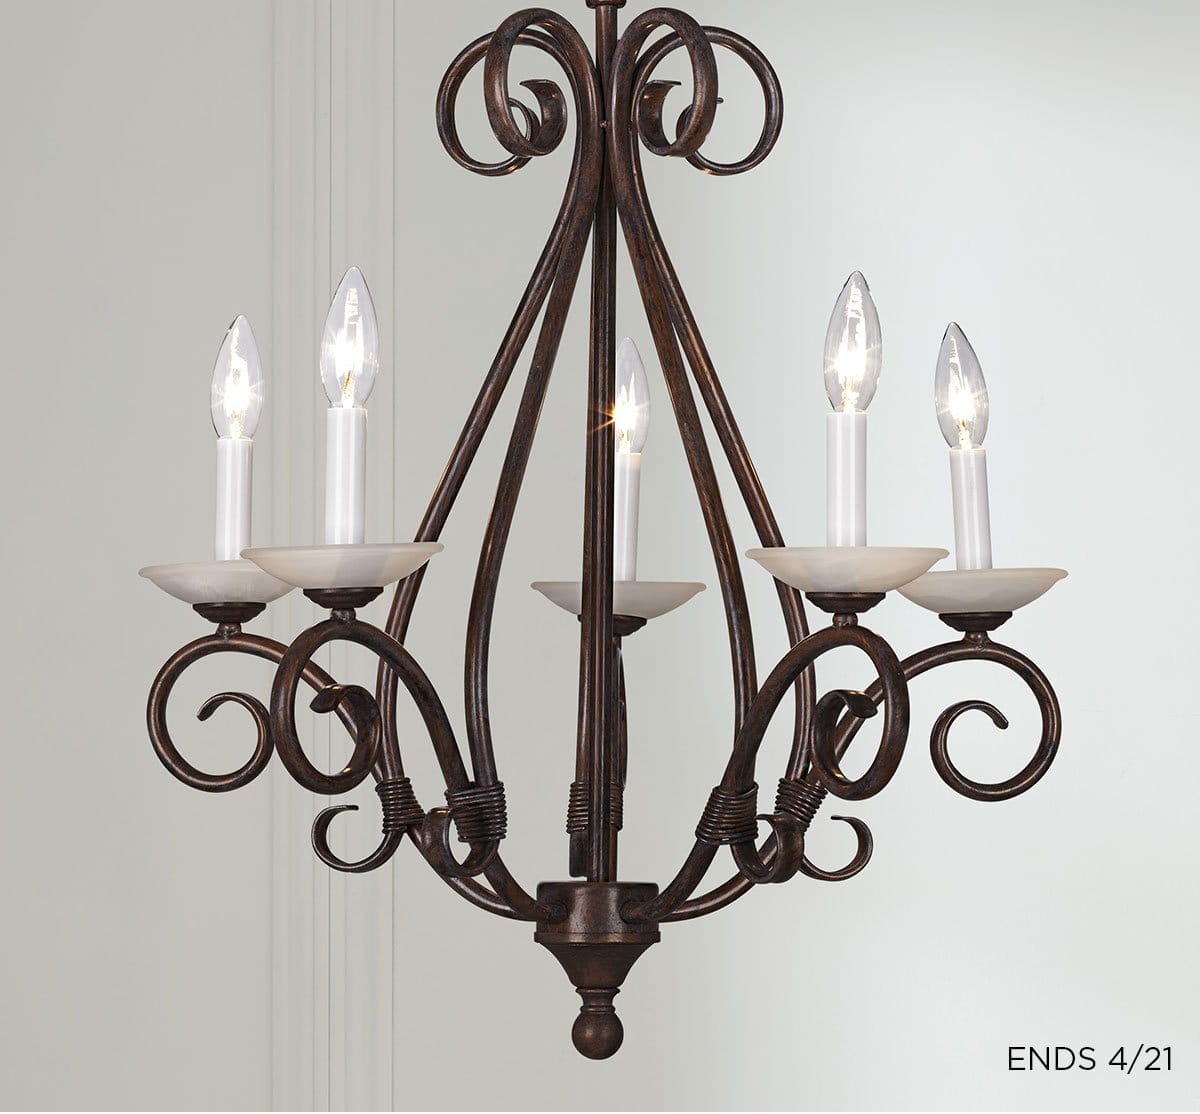 Iron Scroll 23" Wide 5-Light Traditional Candelabra Chandelier - Ends 4/21